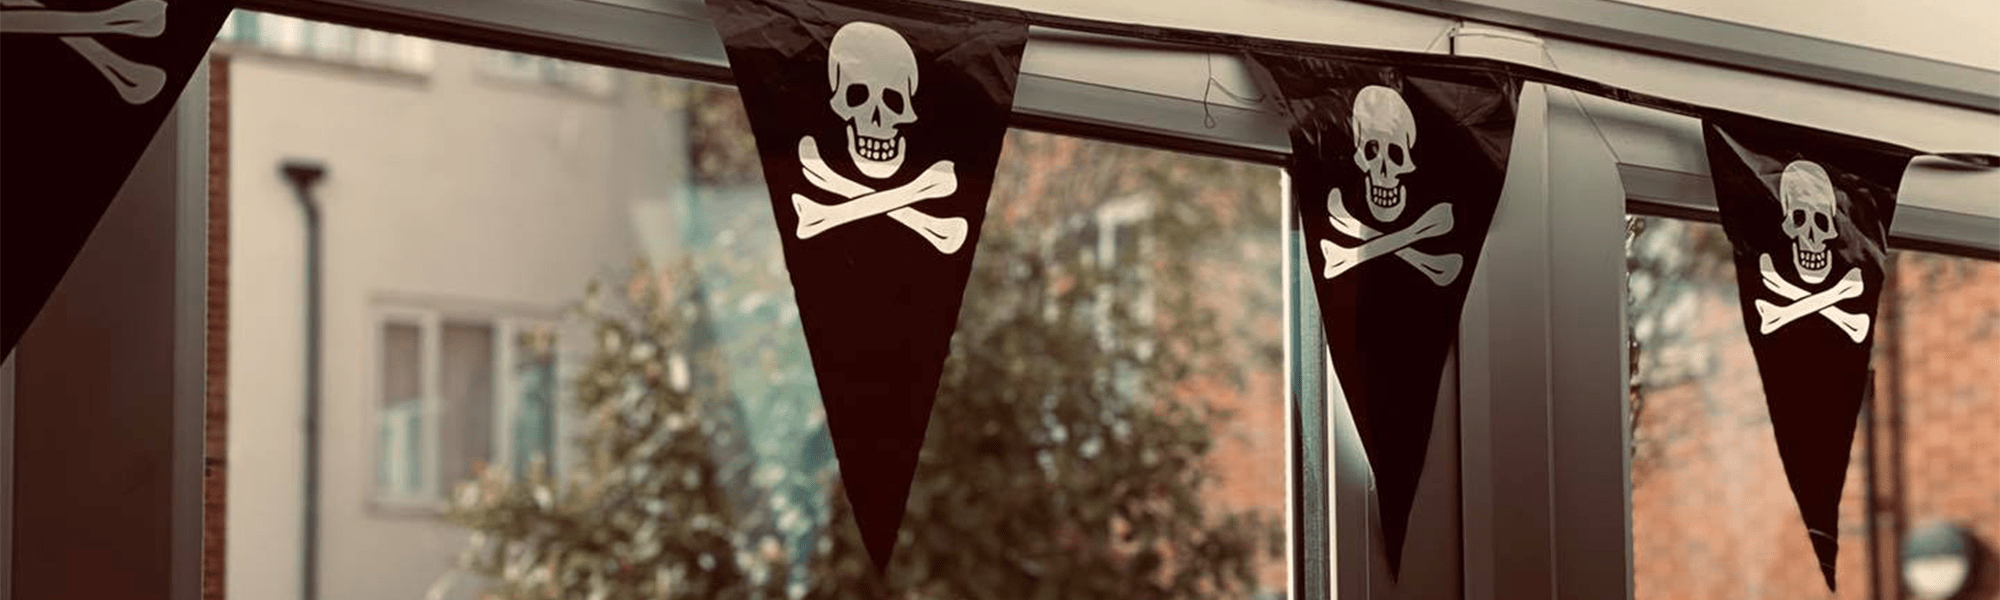 pirate banner